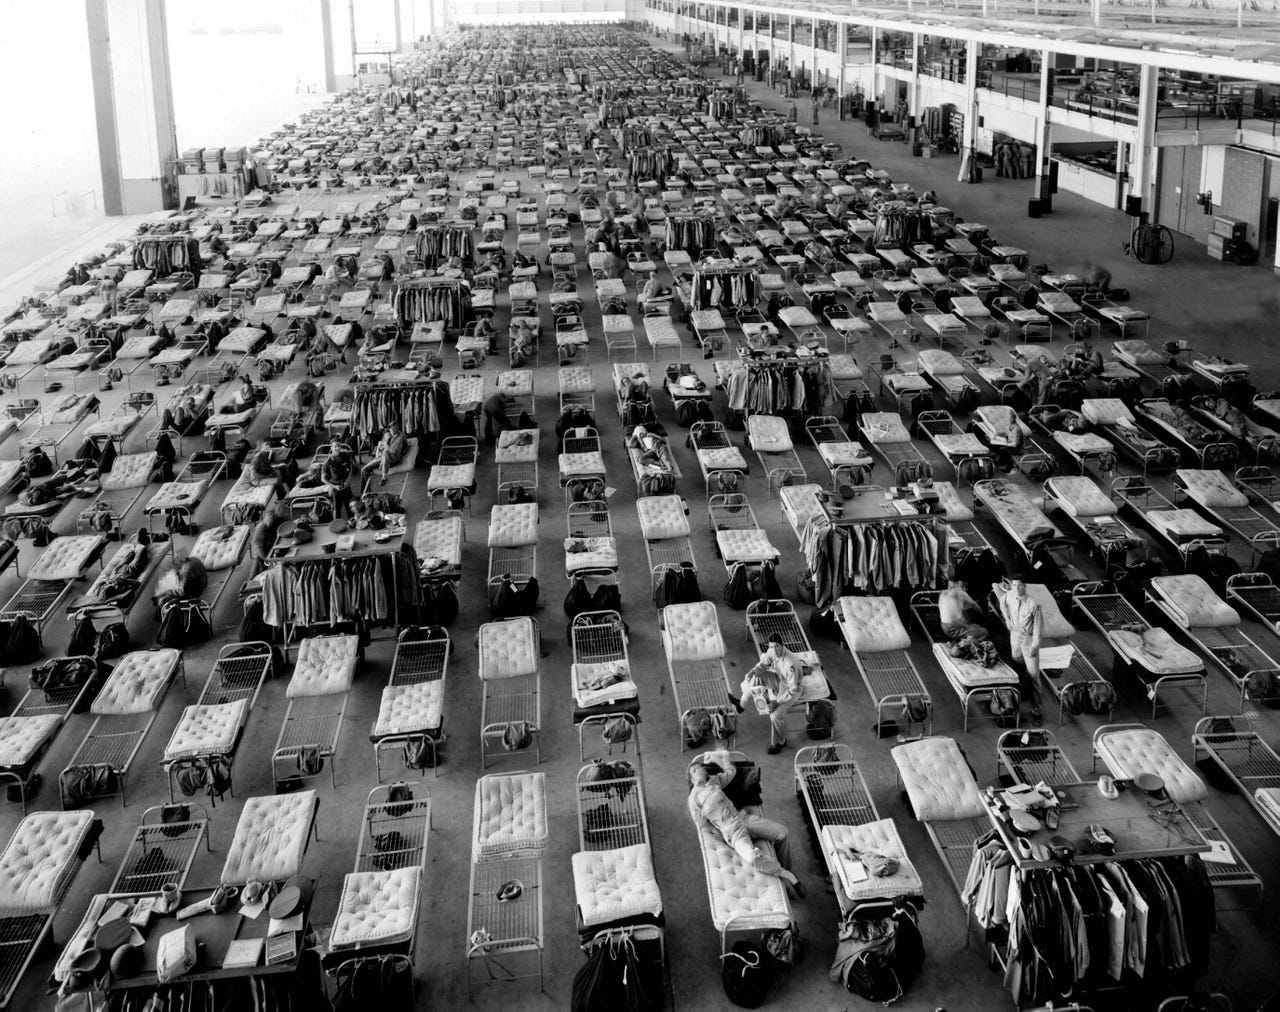 A hangar at Willow Run was turned into a barracks for Army personnel brought in to fly out the newly built bombers. Off-duty soldiers can be seen sprawled on some of the 1,300 cots.